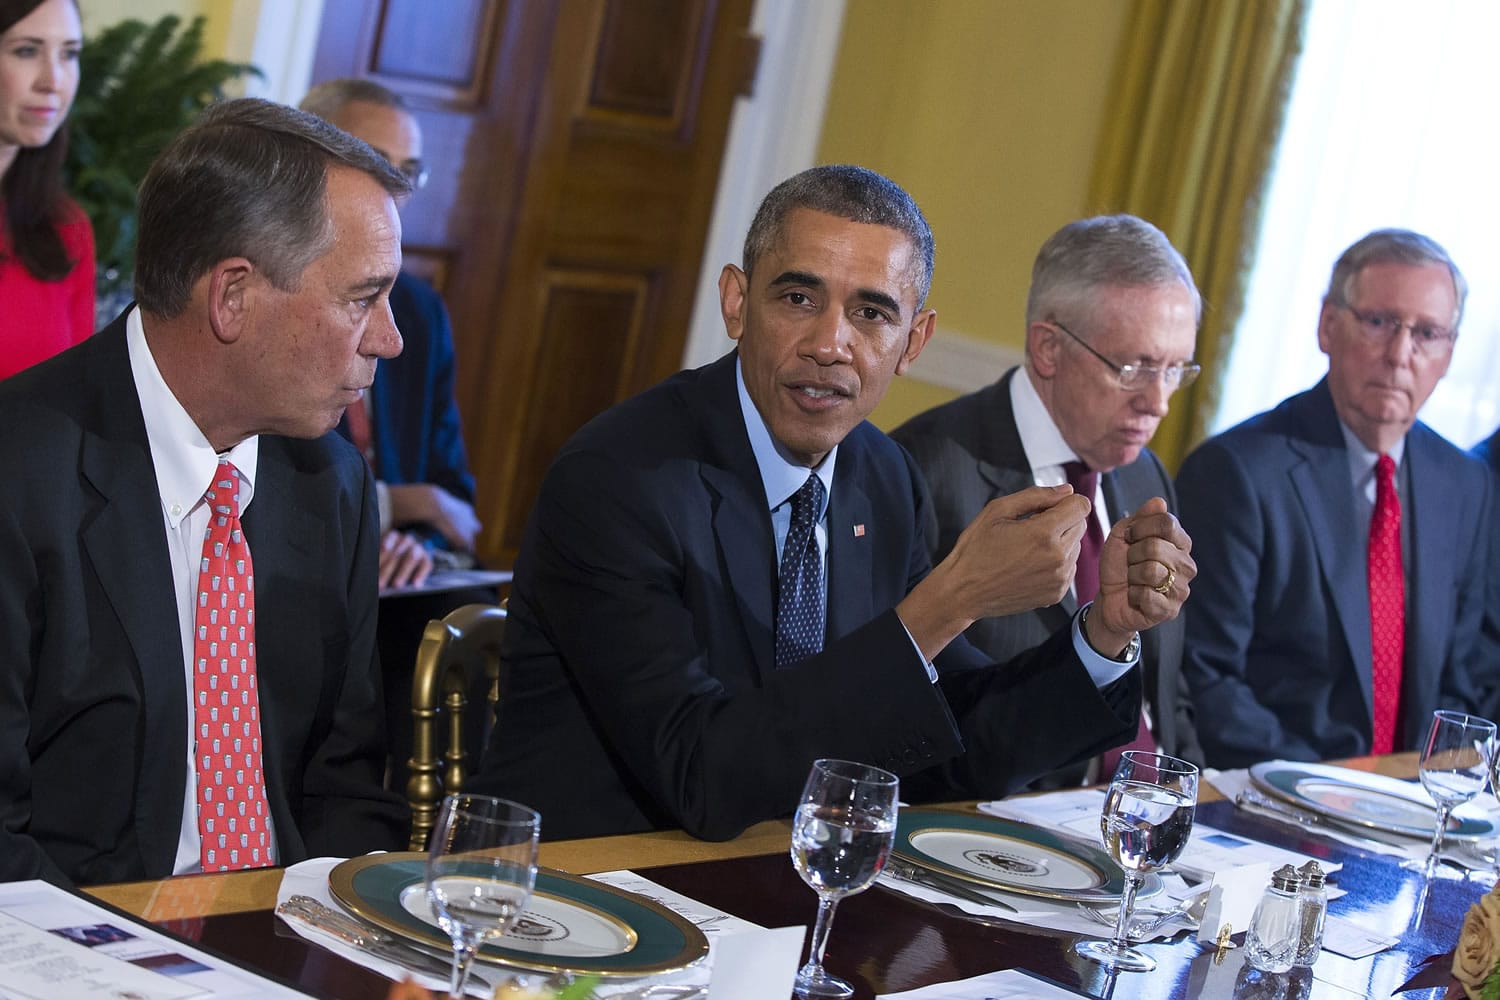 President Barack Obama meets with congressional leaders Friday in the Old Family Dining Room of the White House in Washington. From left are House Speaker John Boehner of Ohio, Obama, Senate Majority Leader Harry Reid of Nevada, and Senate Minority Leader Mitch McConnell of Kentucky.